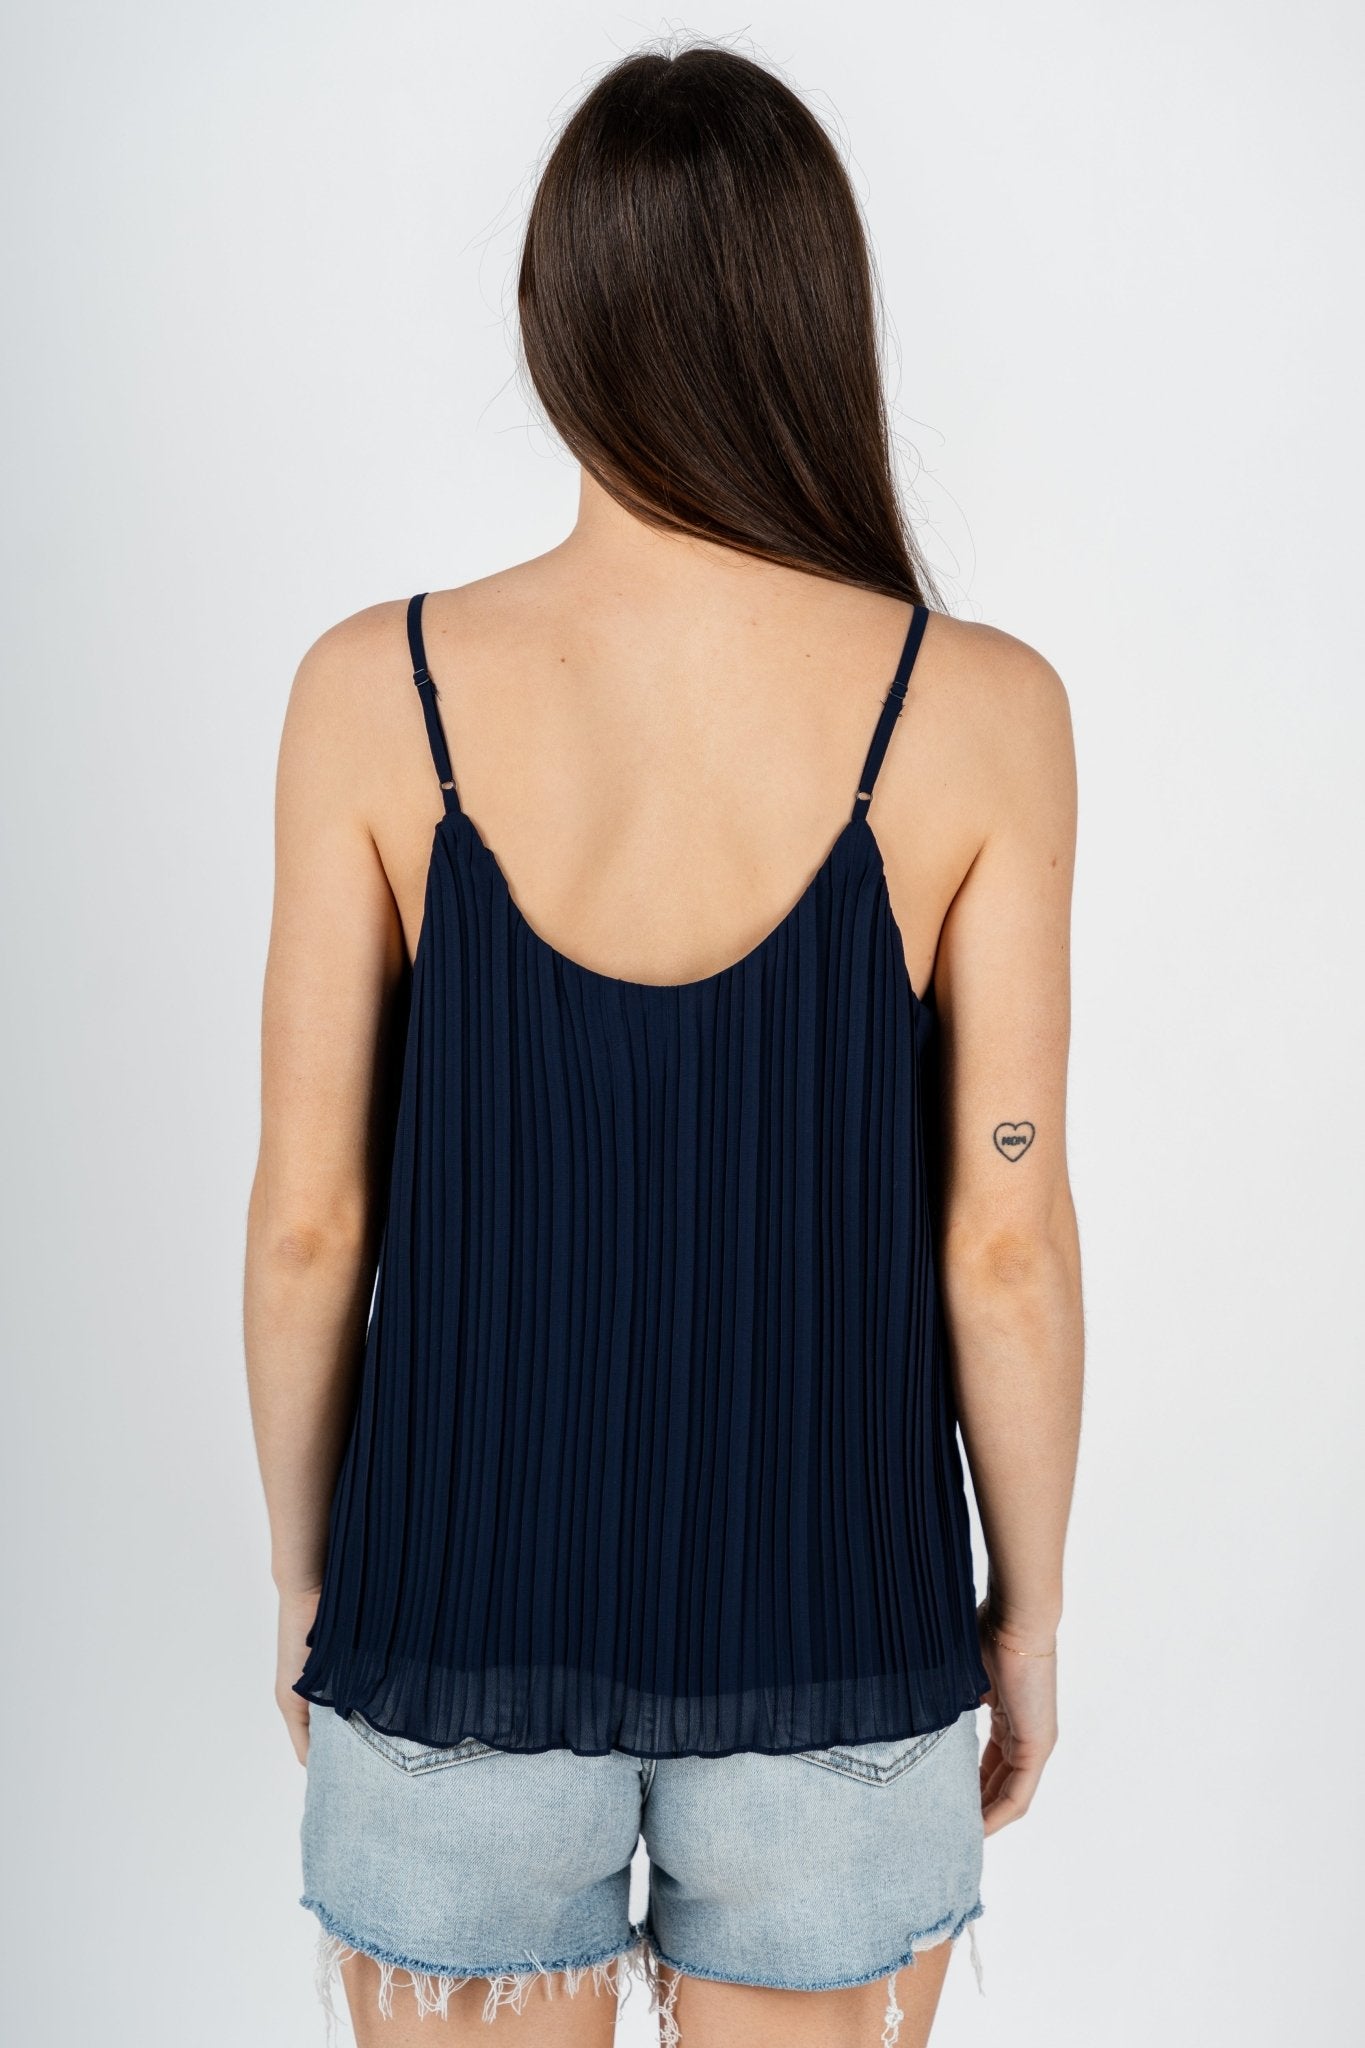 Pleated lace cami tank top navy - Adorable sweater - Stylish Patriotic Summer Graphic Tees at Lush Fashion Lounge Boutique in OKC